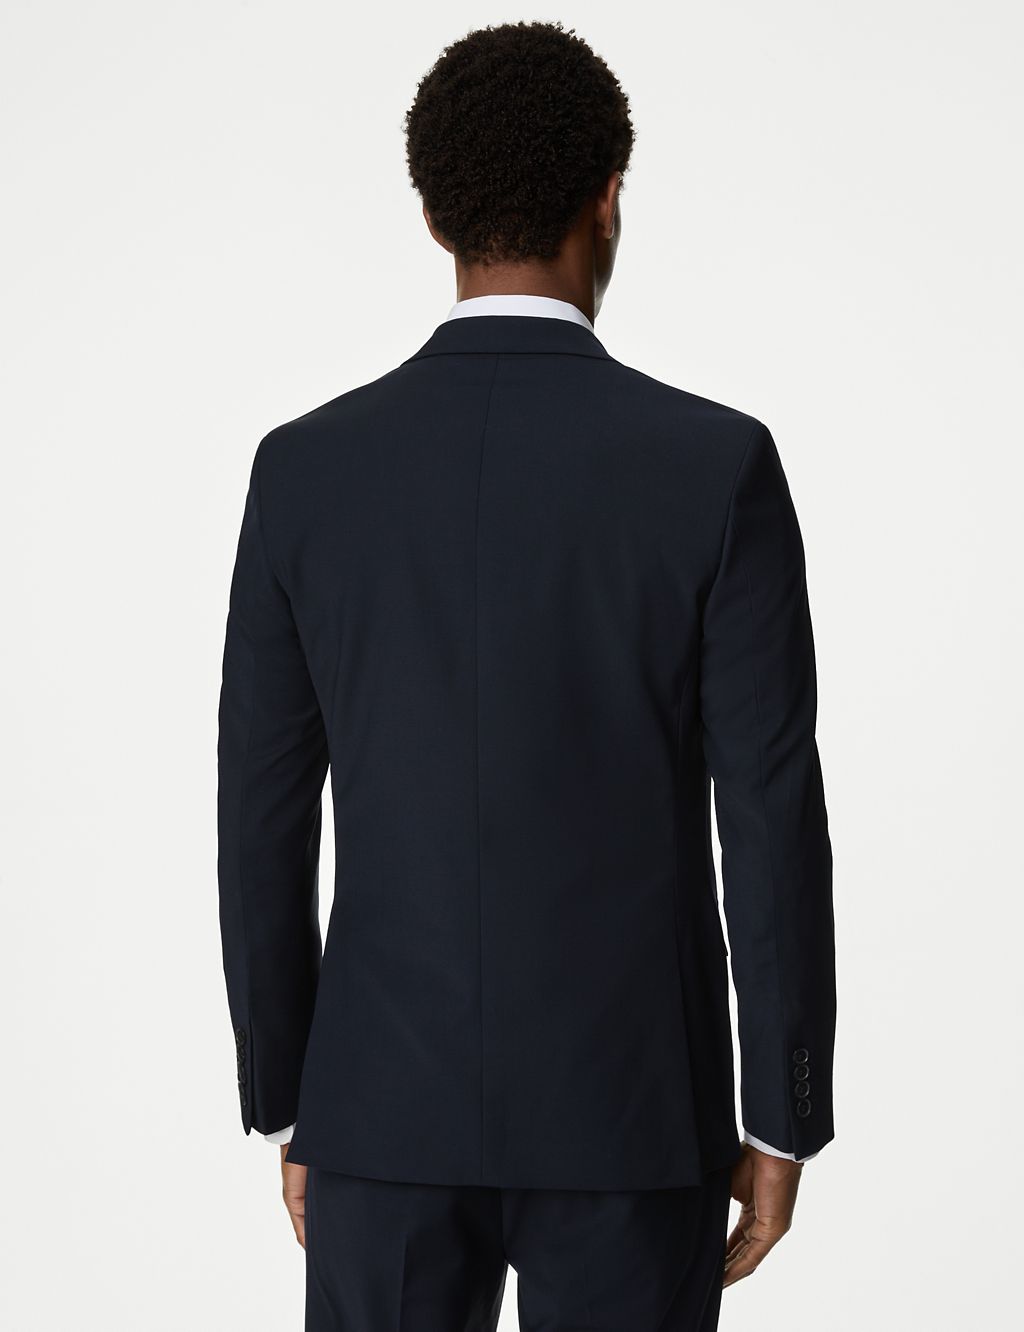 Tailored Fit Performance Suit Jacket 7 of 7